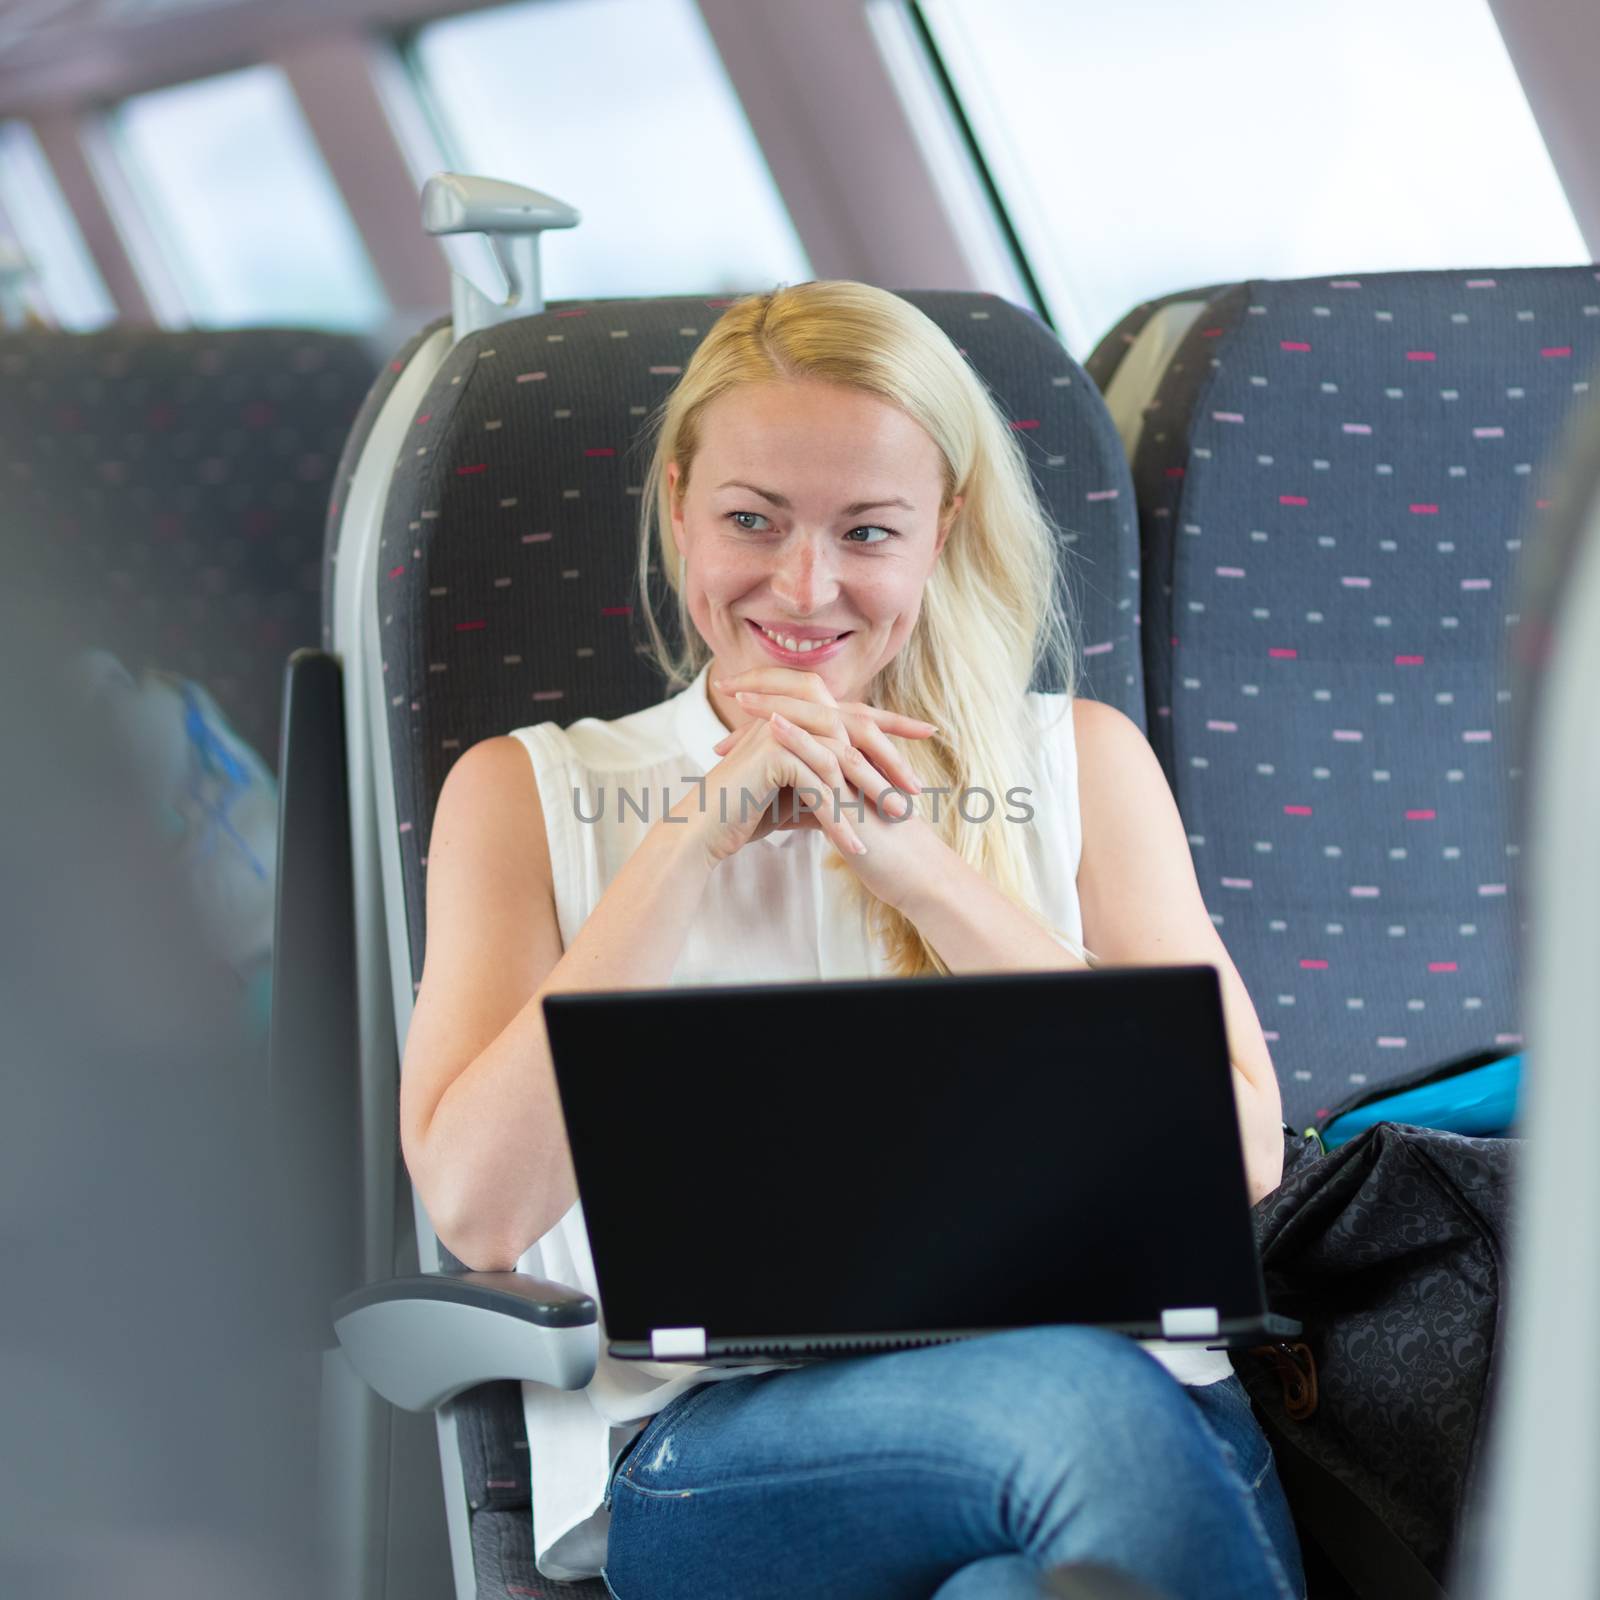 Woman traveling by train smiling and flirting while working on laptop.